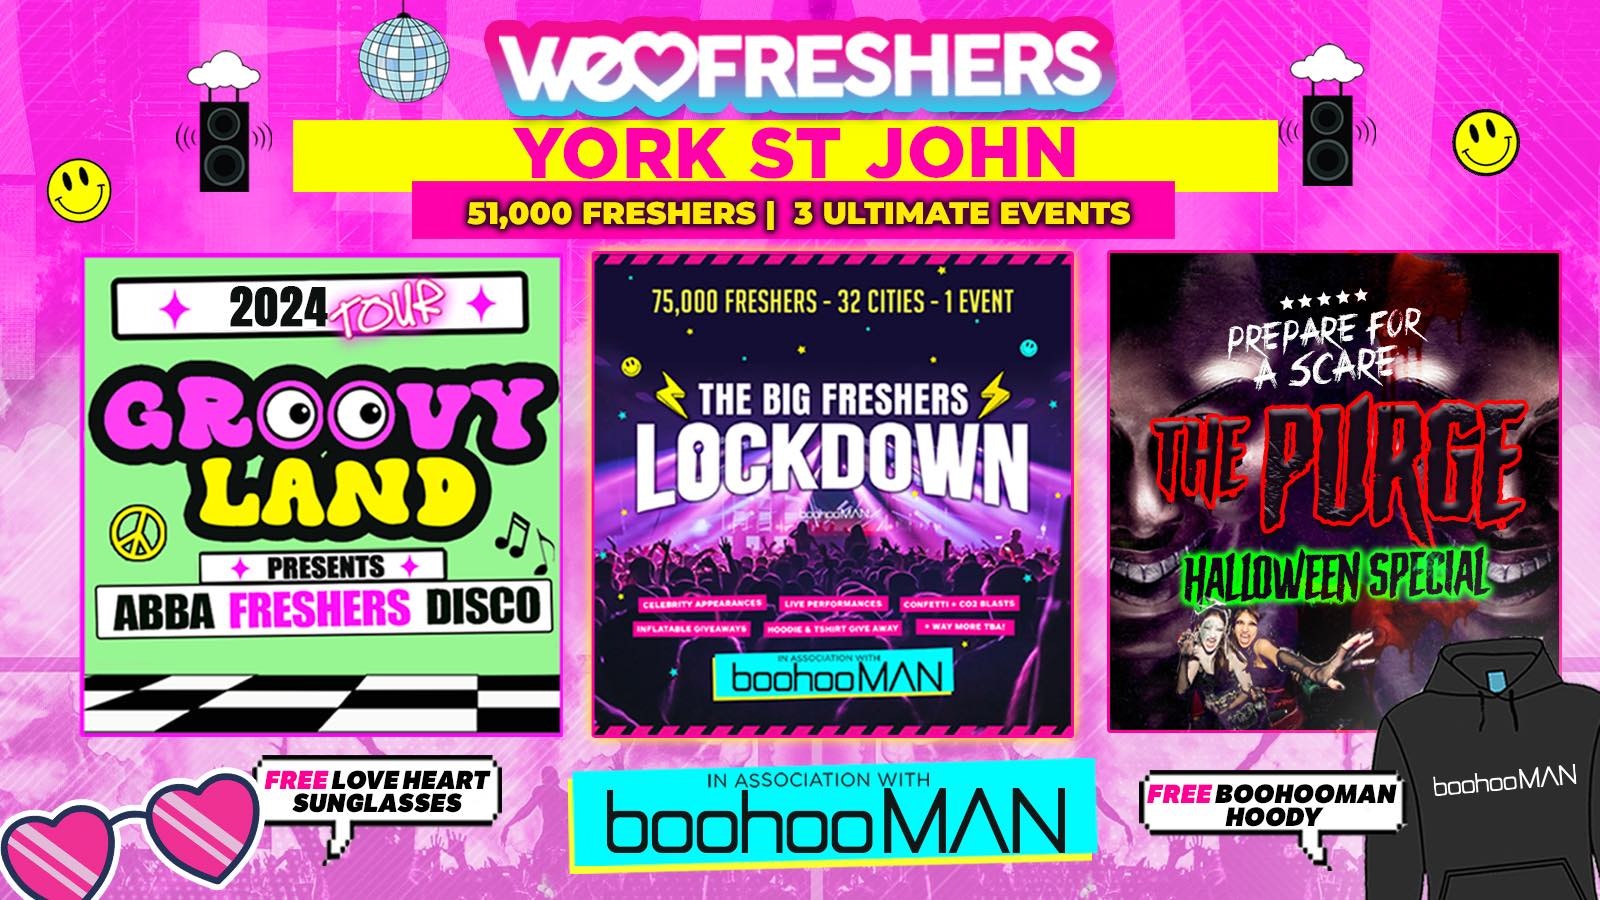 WE LOVE YORK ST. JOHNS FRESHERS 2024 in association with boohooMAN ❗3 EVENTS ❗